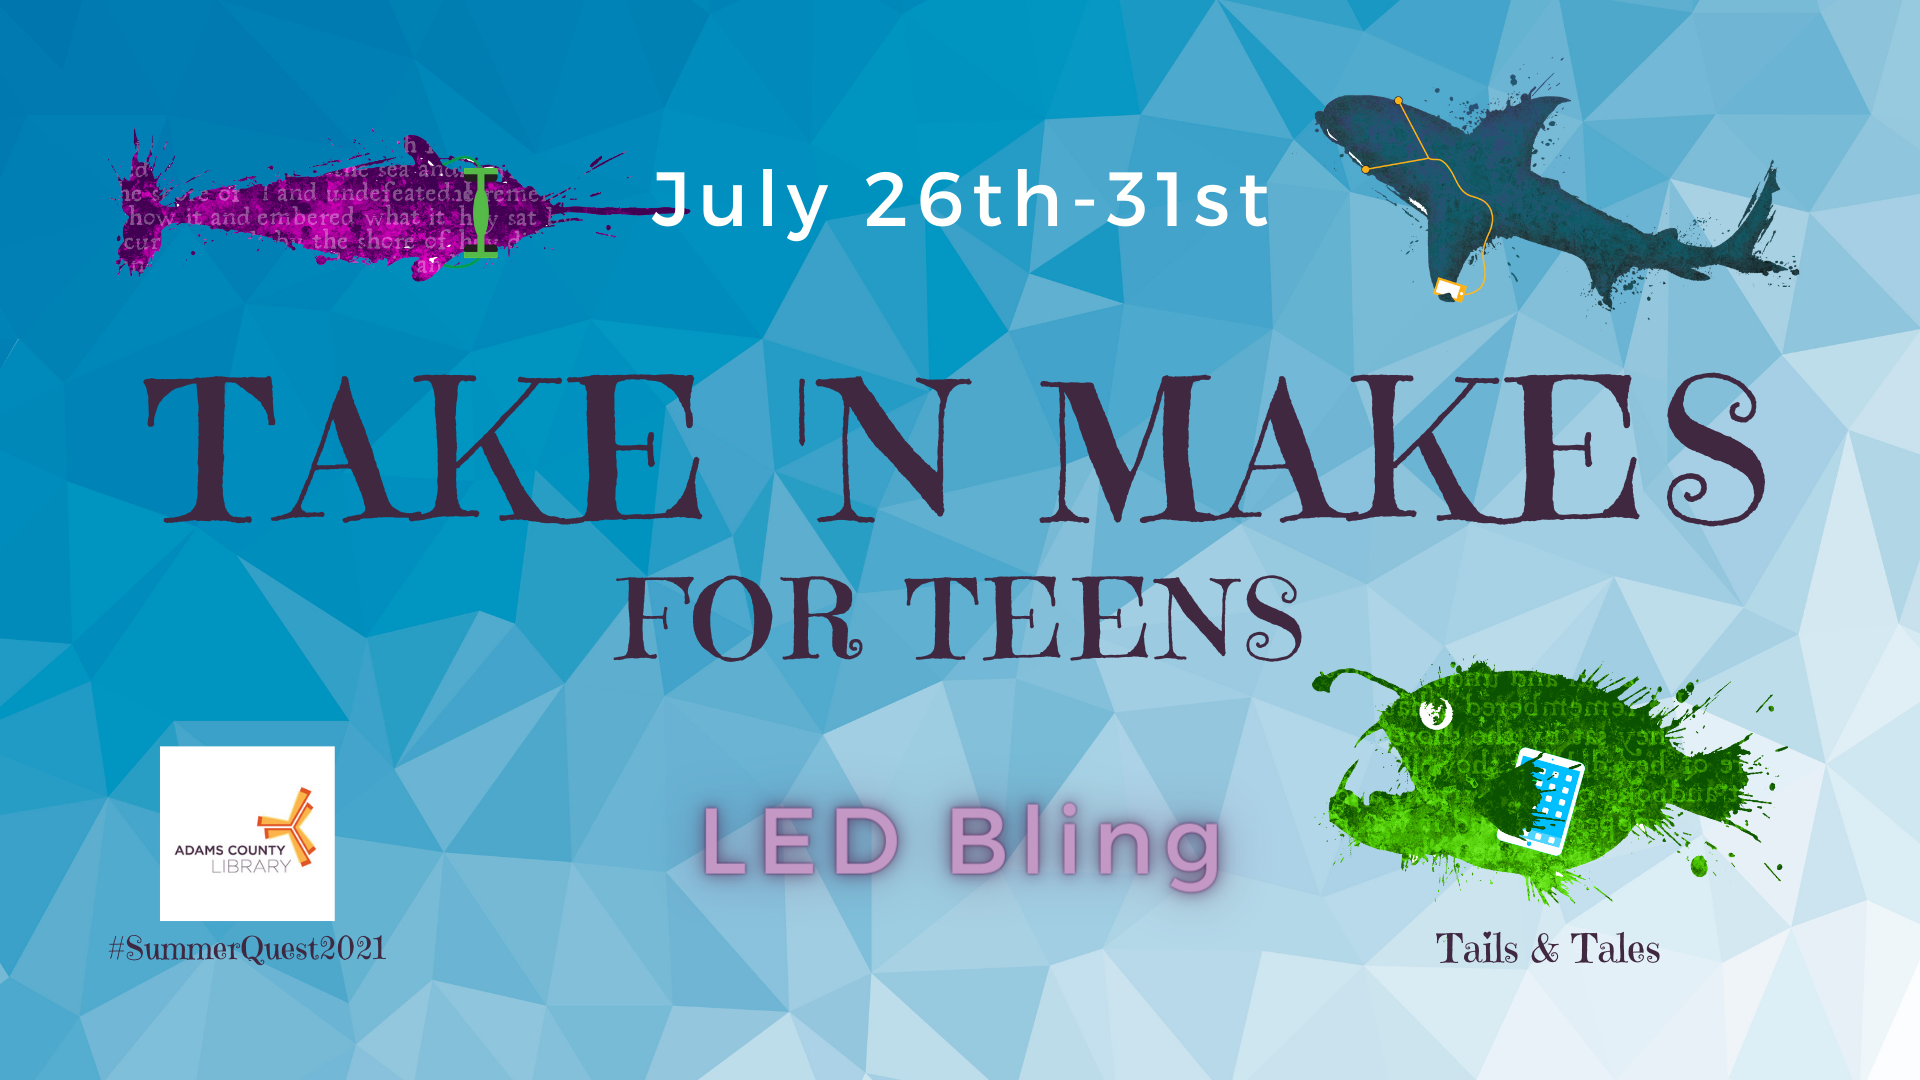 Pick up a Take n' Make for Teens from July 26th through July 31st. This week the project is LED Bling!